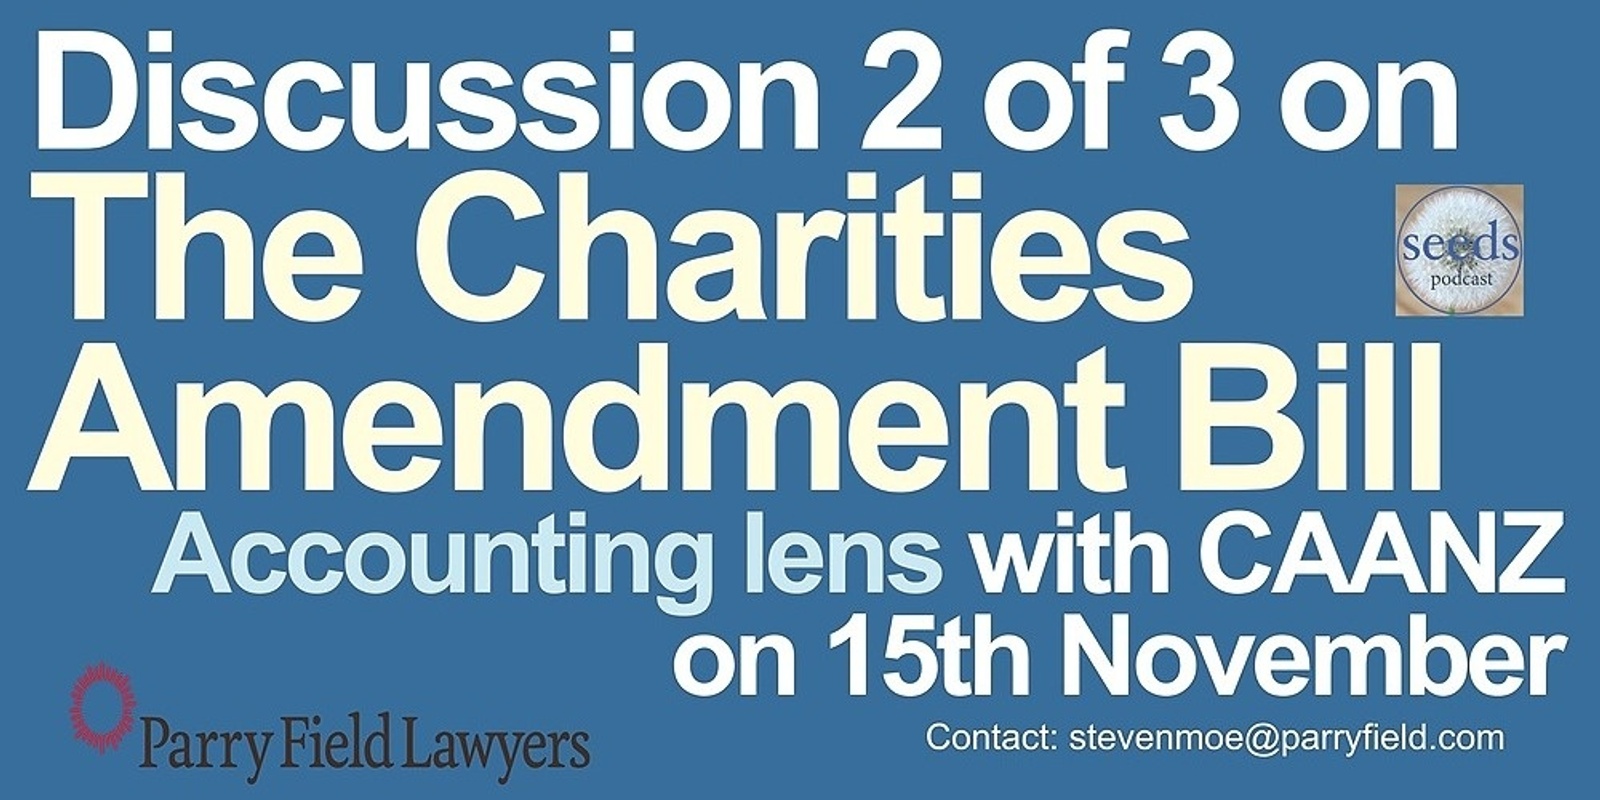 Banner image for Charities Amendment Bill: An Accounting and reporting issues lens in collaboration with CAANZ 